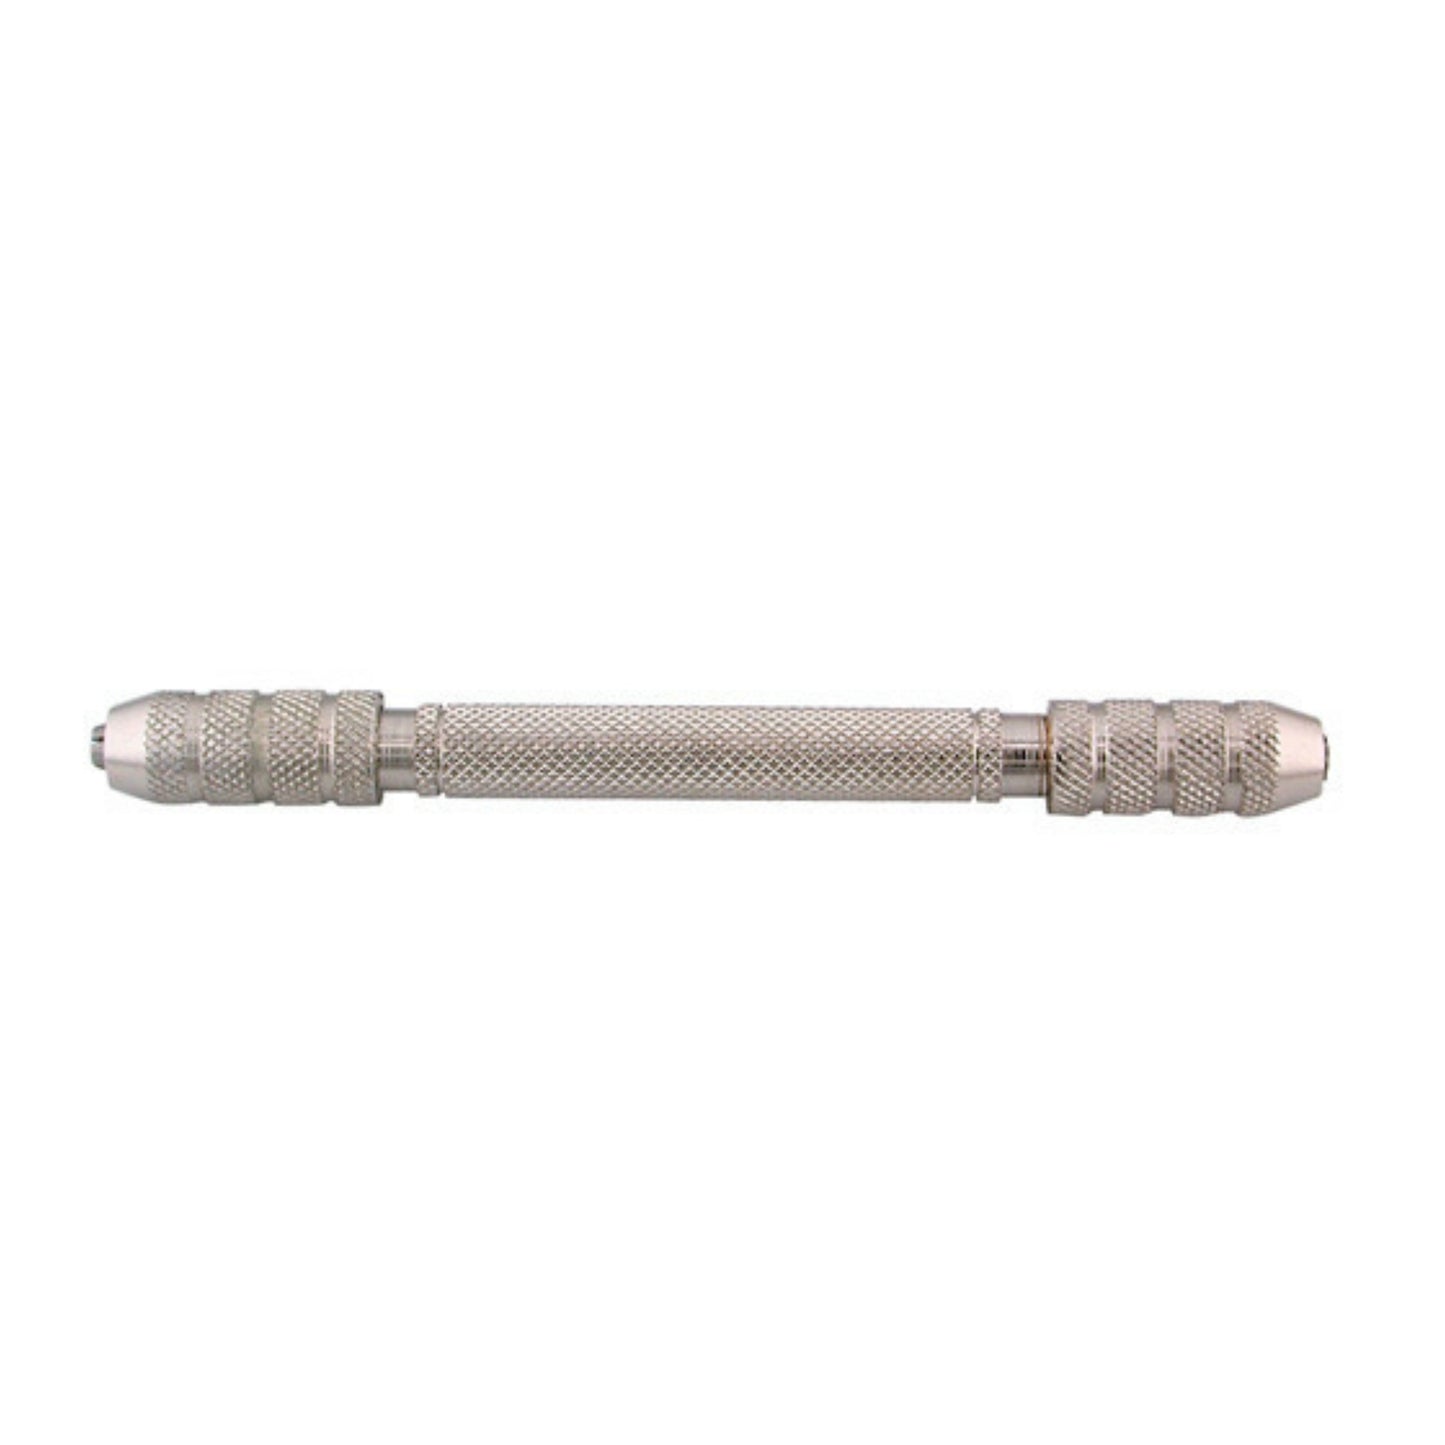 Pin Vise - Double End